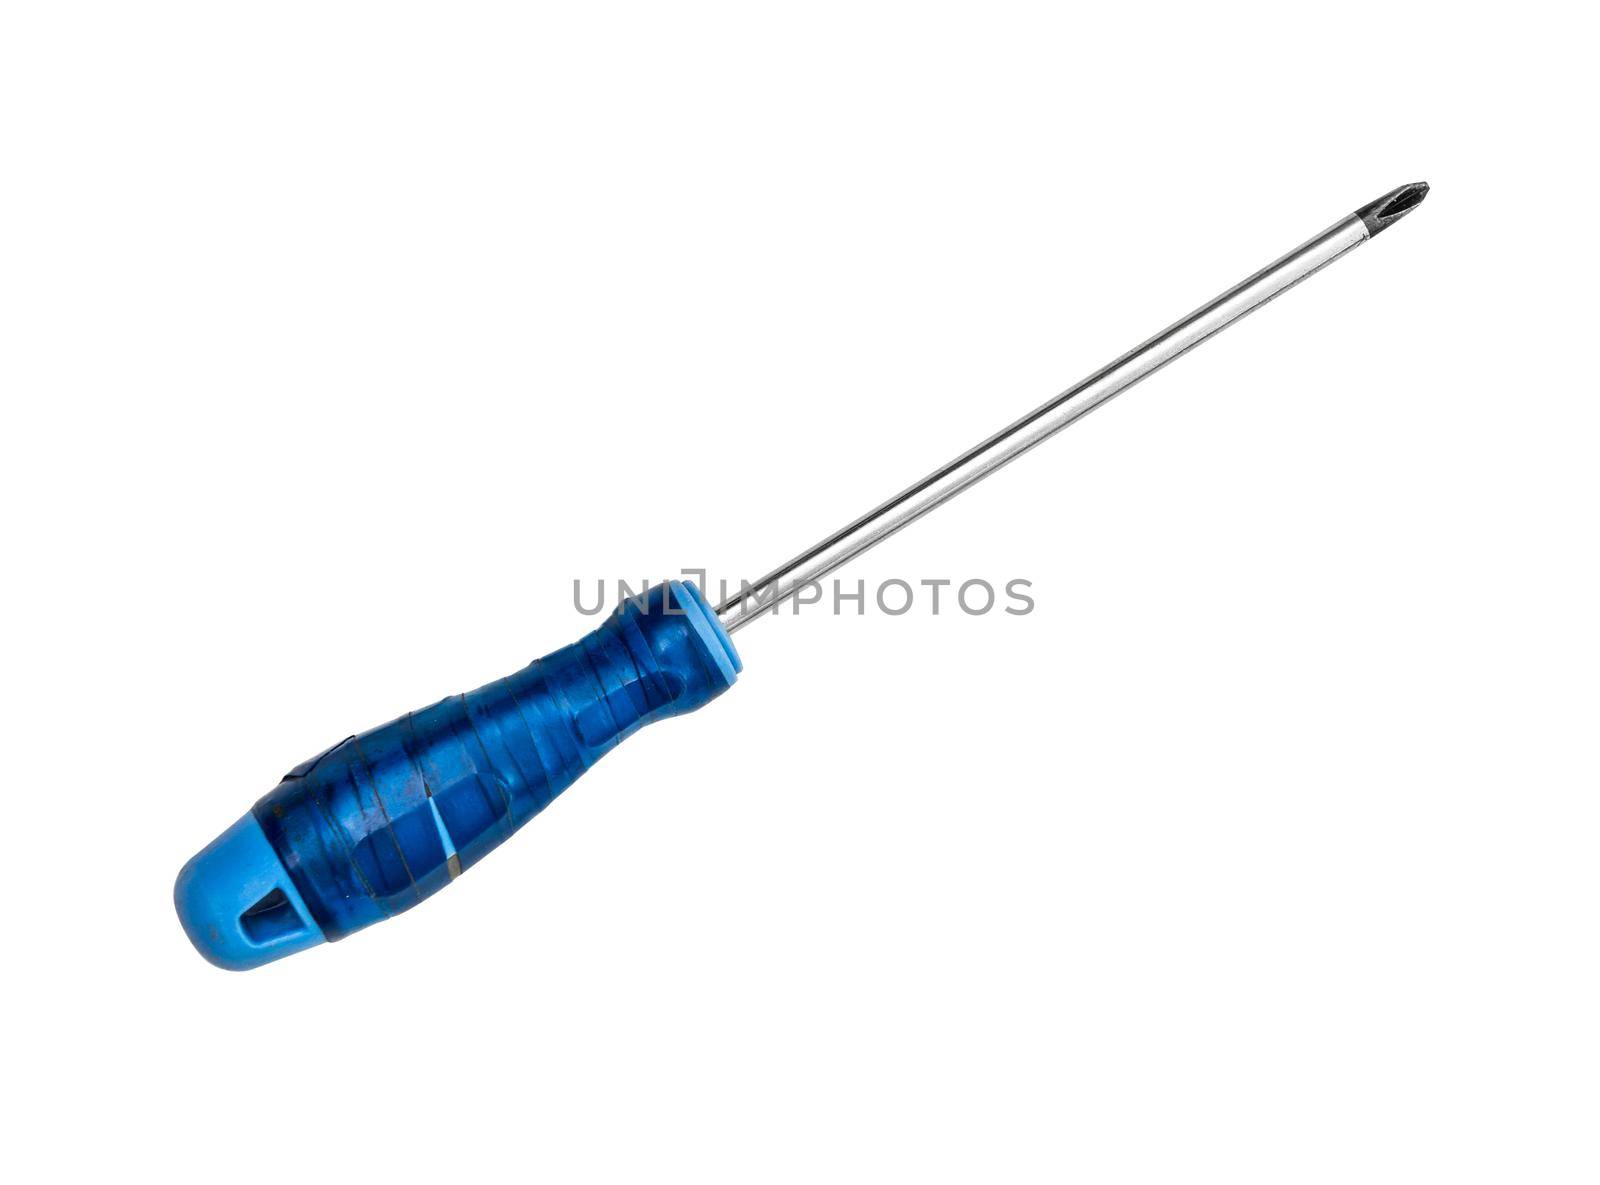 Old blue screwdriver isolated on white background